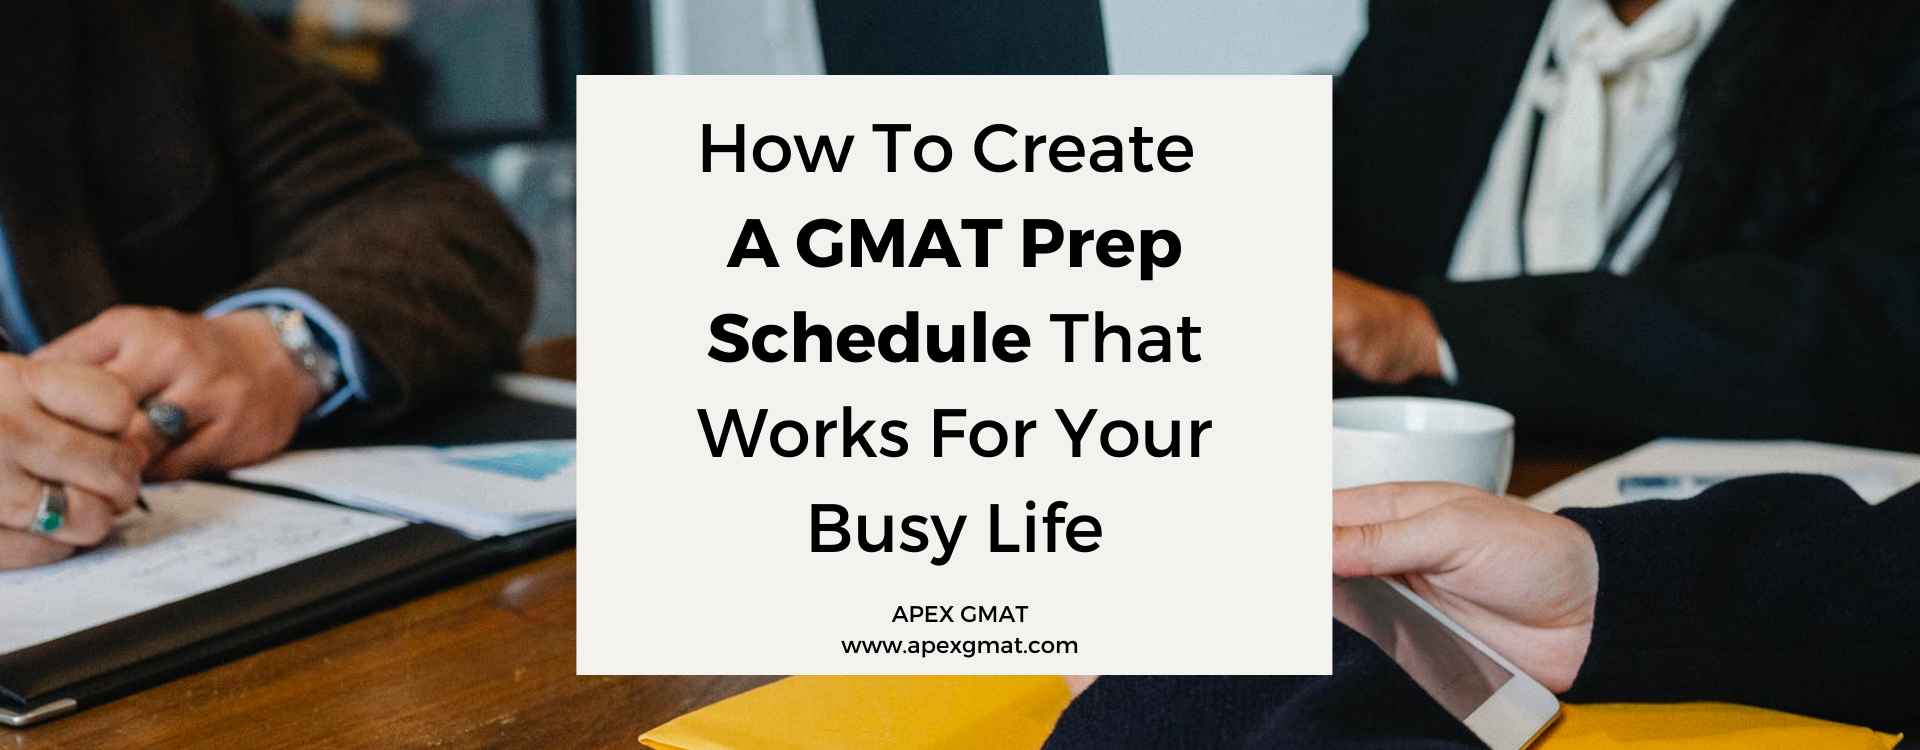 How To Create A GMAT Prep Schedule That Works For Your Busy Life